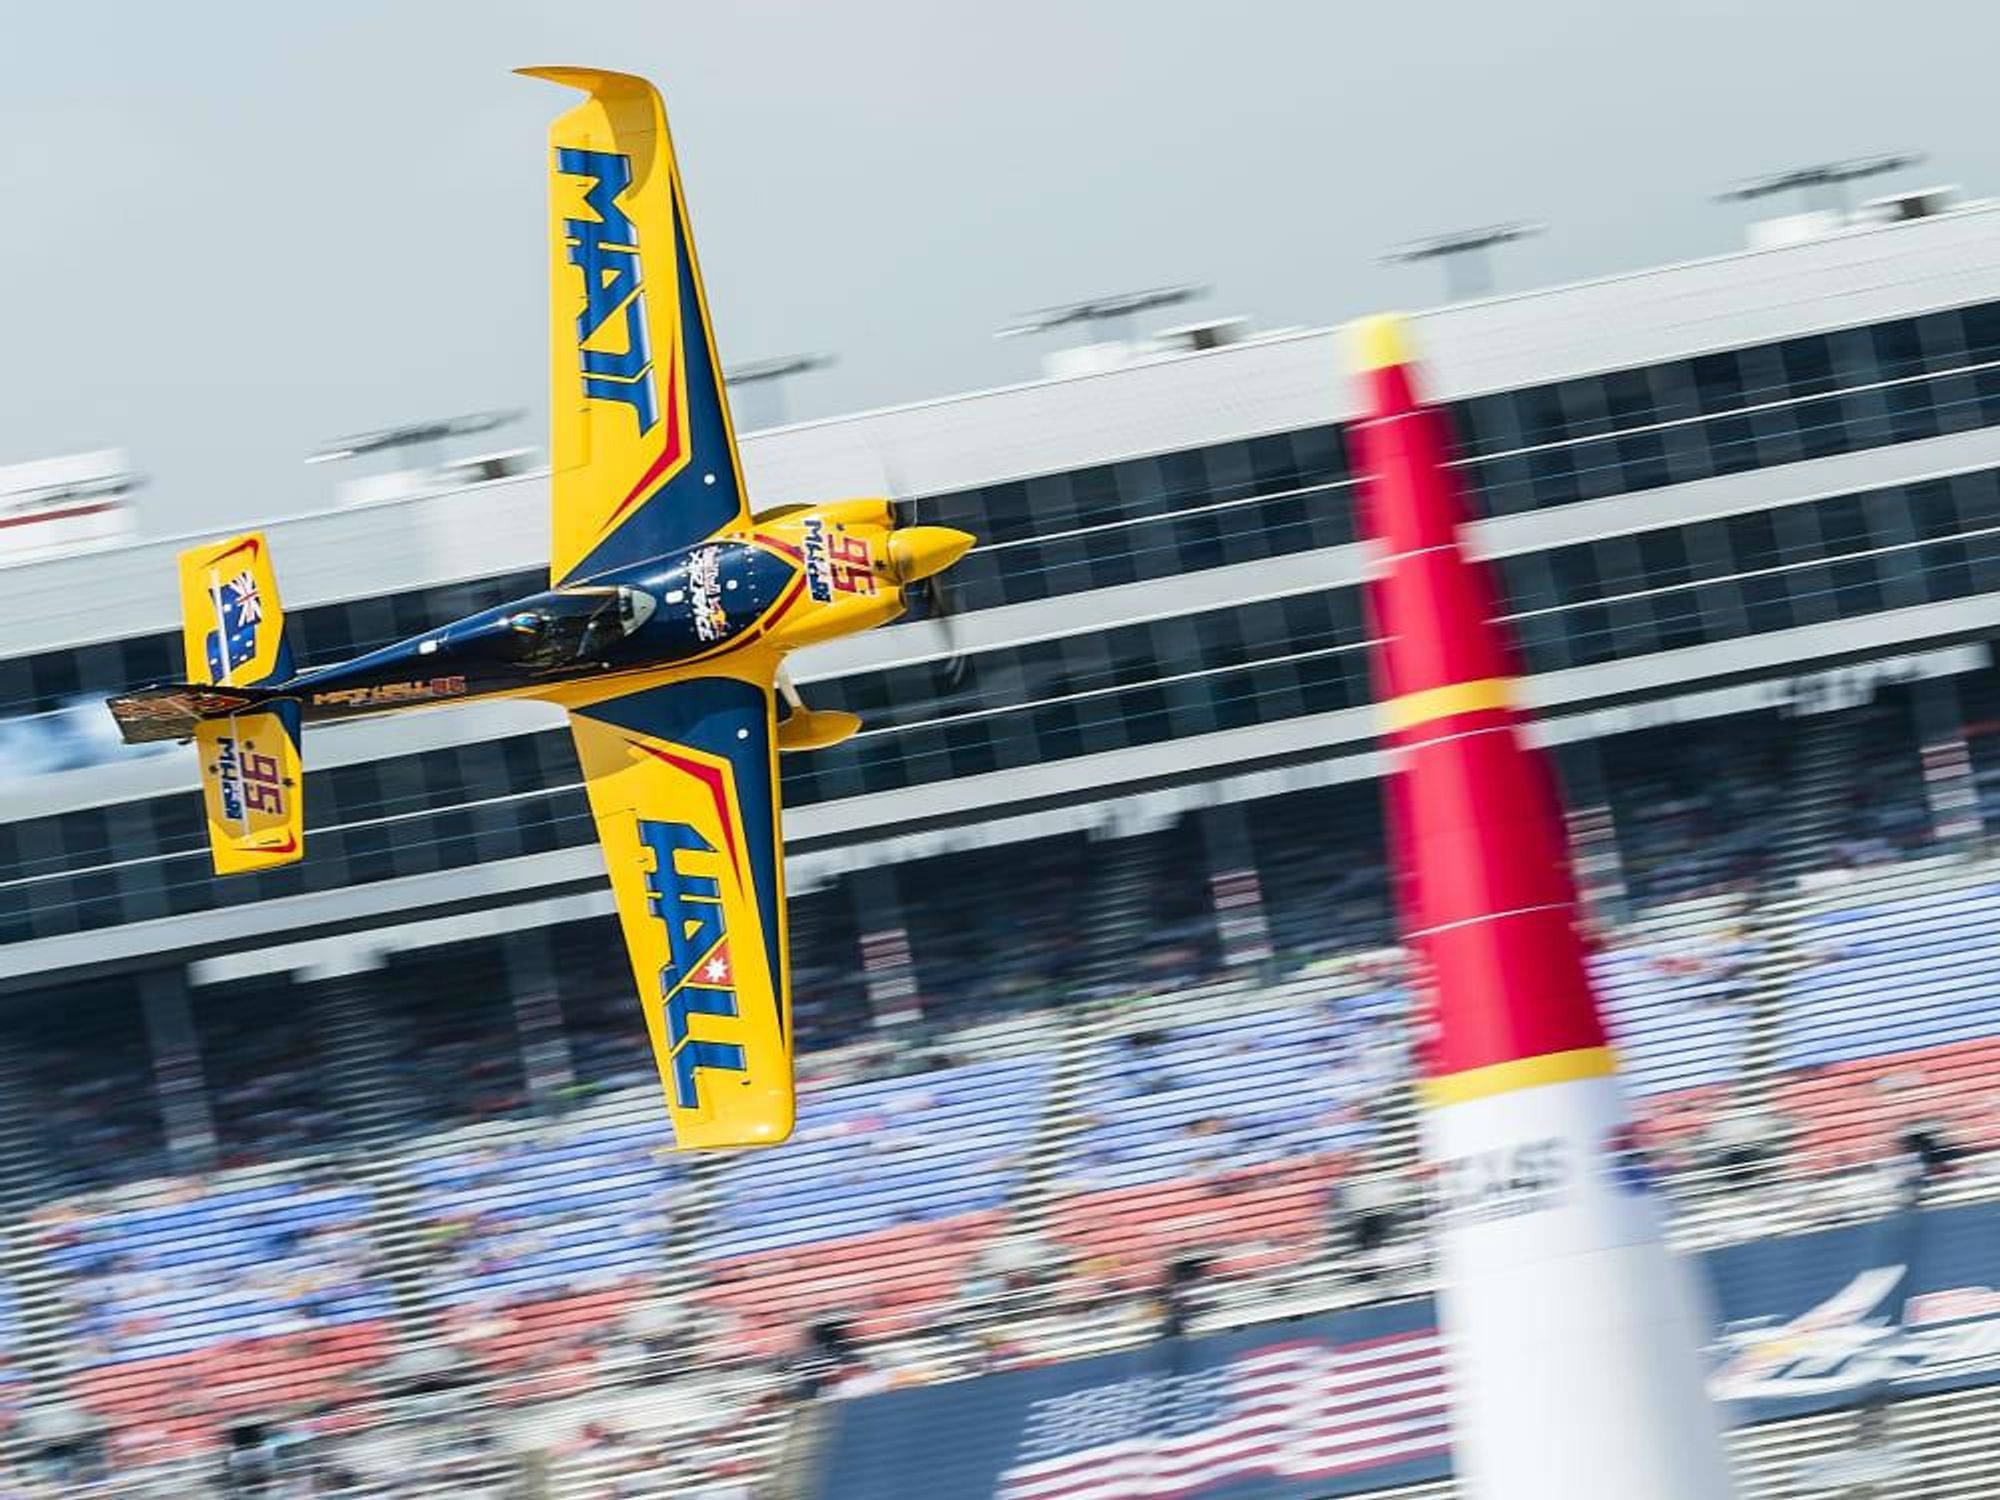 Red Bull Air Race in Fort Worth